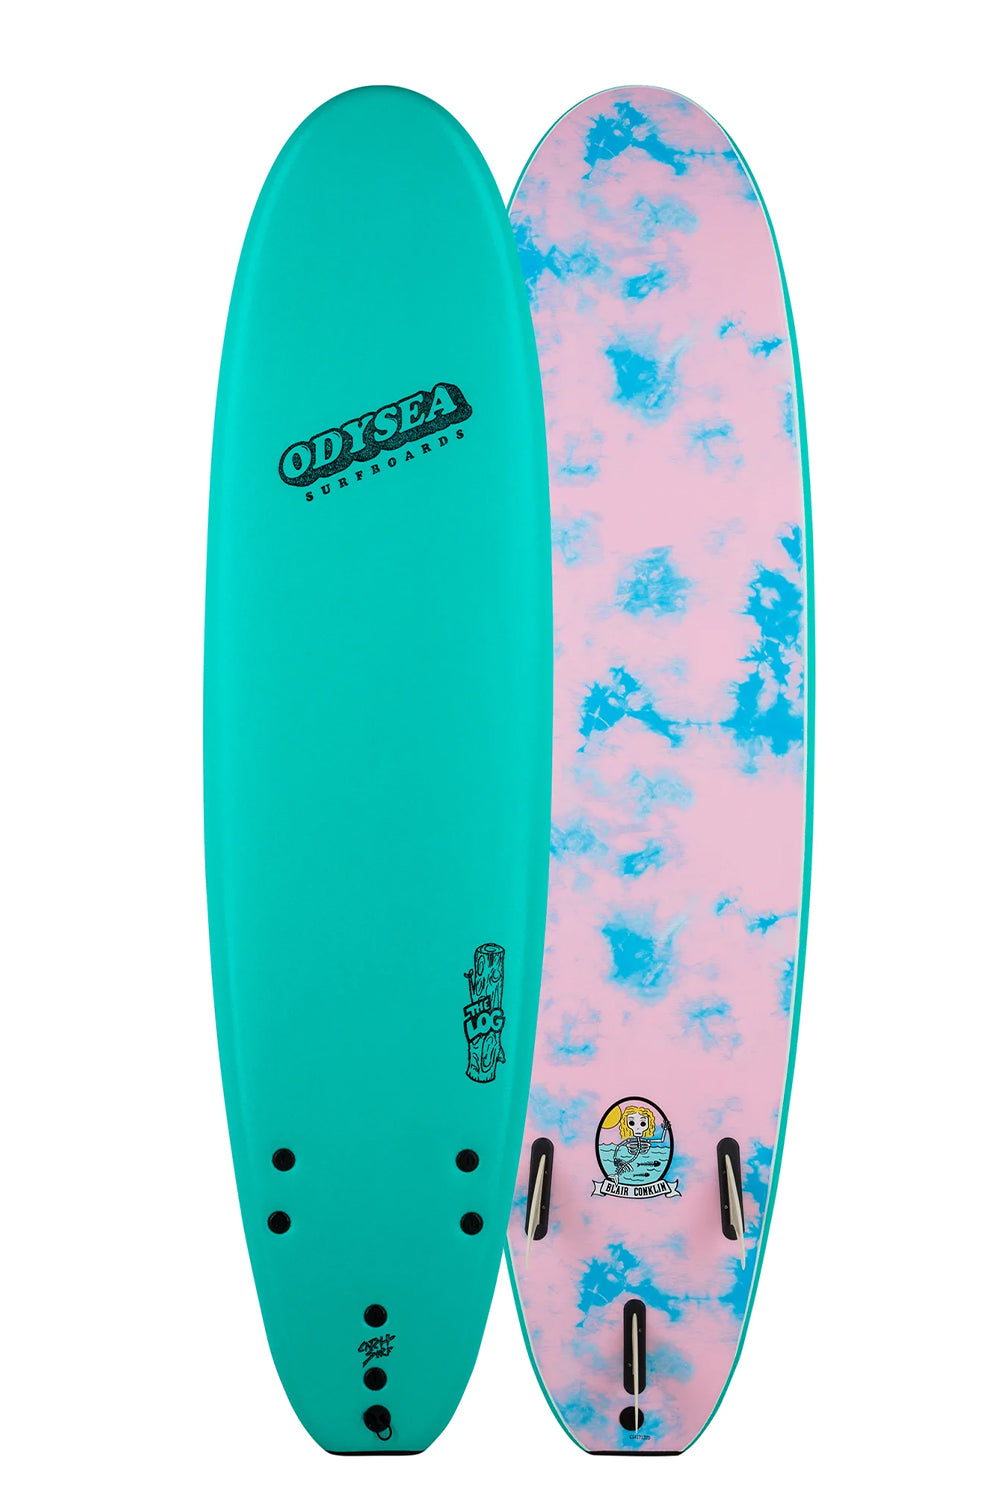 Catch Surf Blair Conklin Odysea Log Softboard - Comes with fins